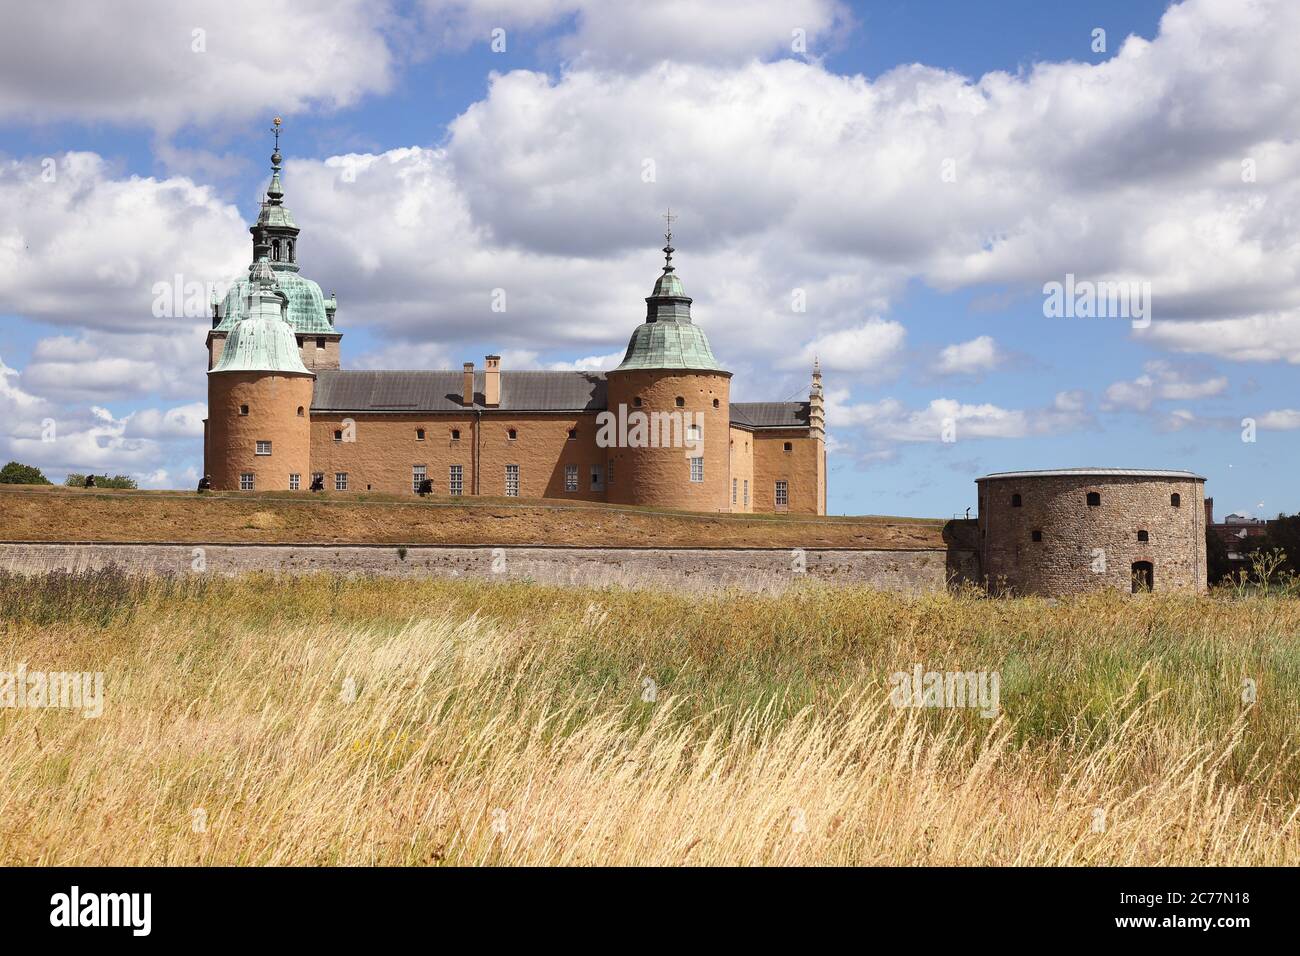 The Kalmar castle located in the Swedish province of Smaland. Stock Photo